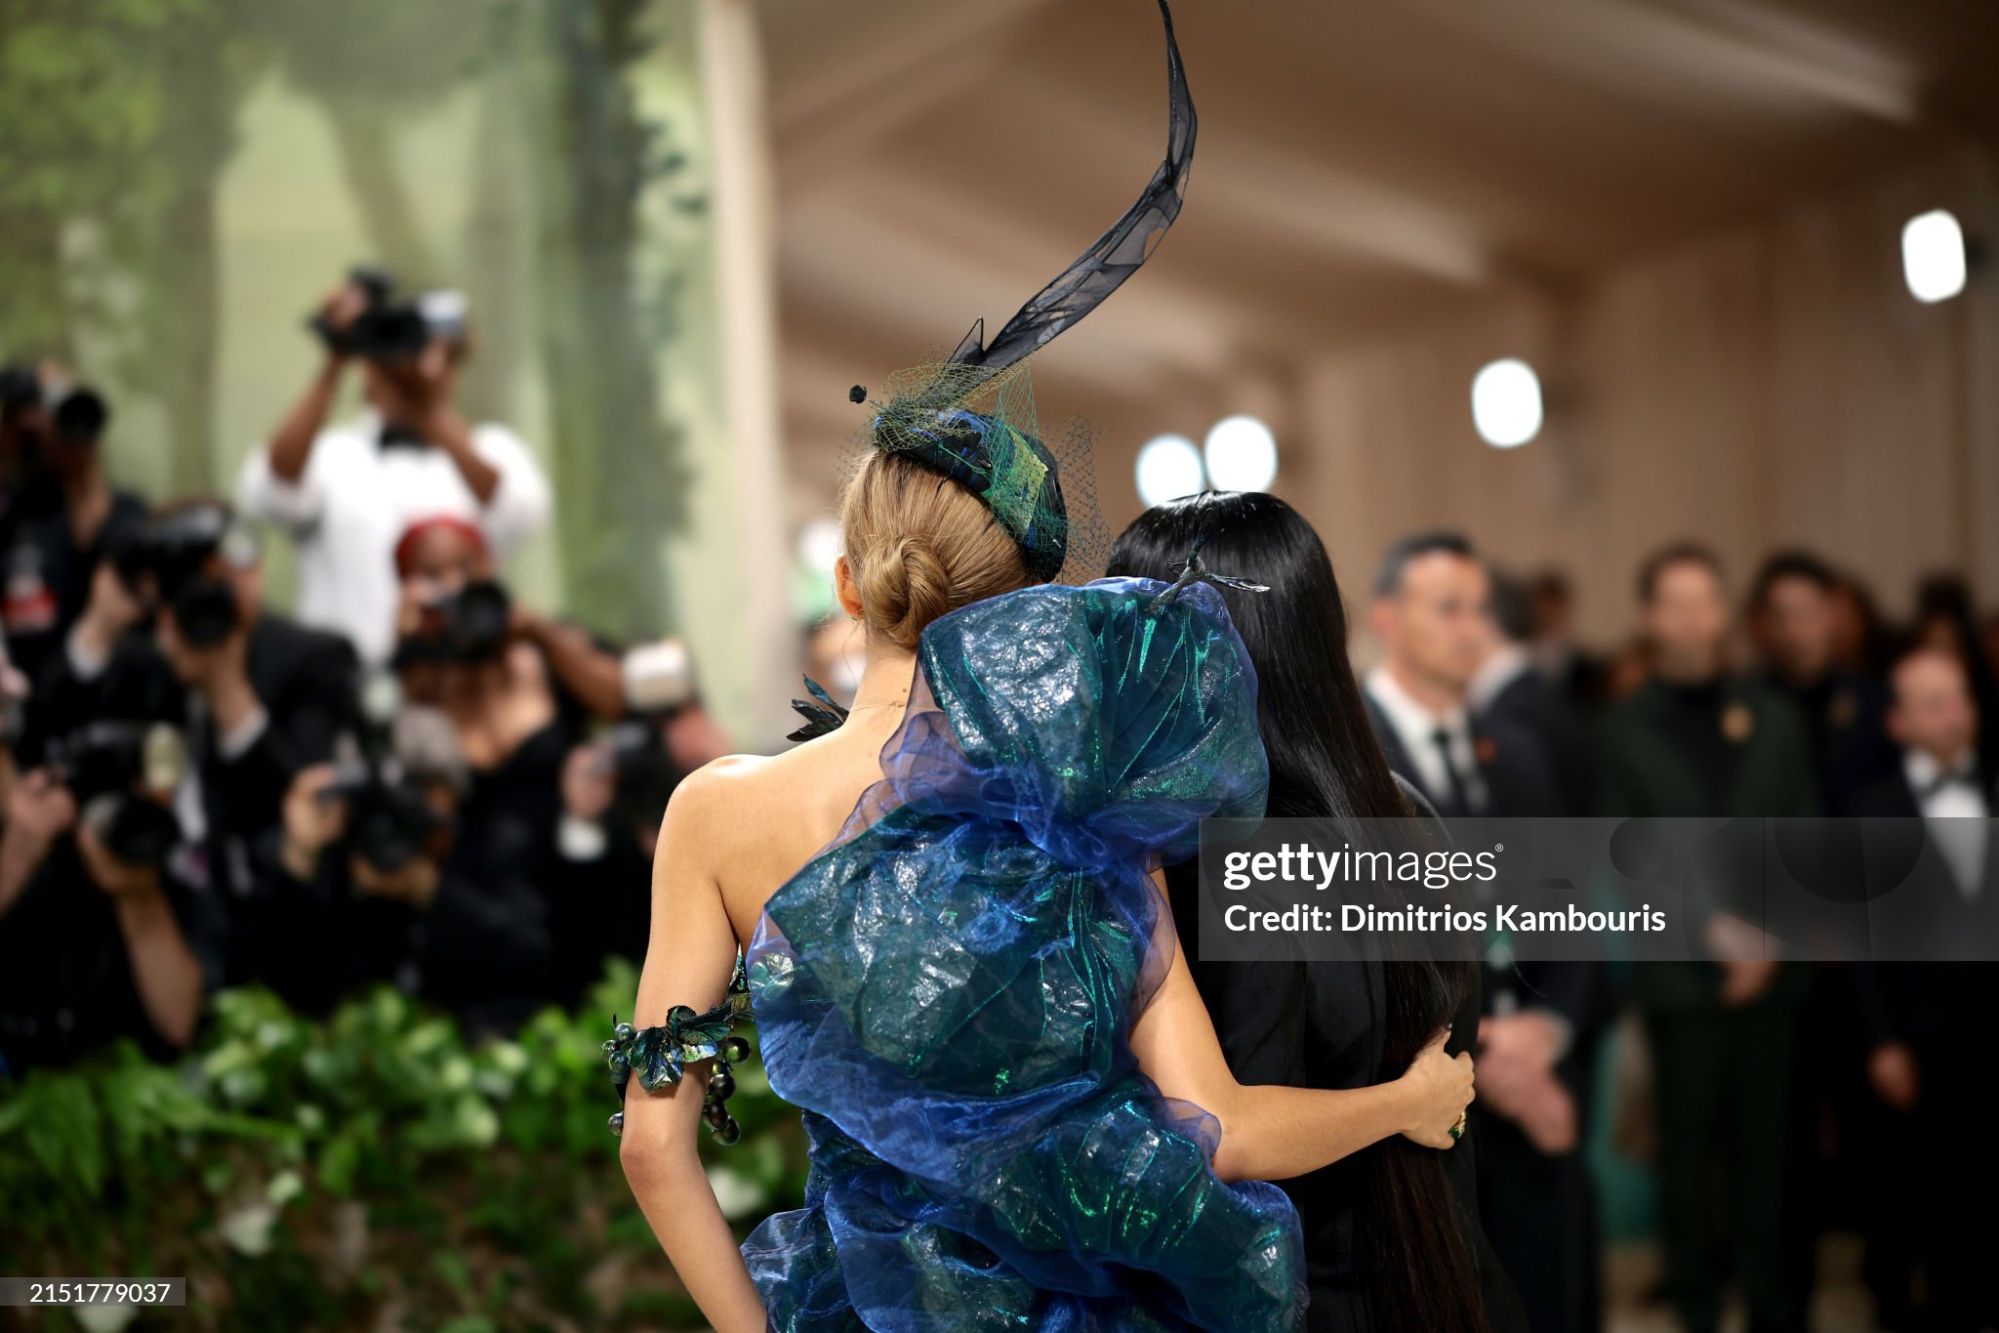 gettyimages-2151779037-2048x2048.jpg